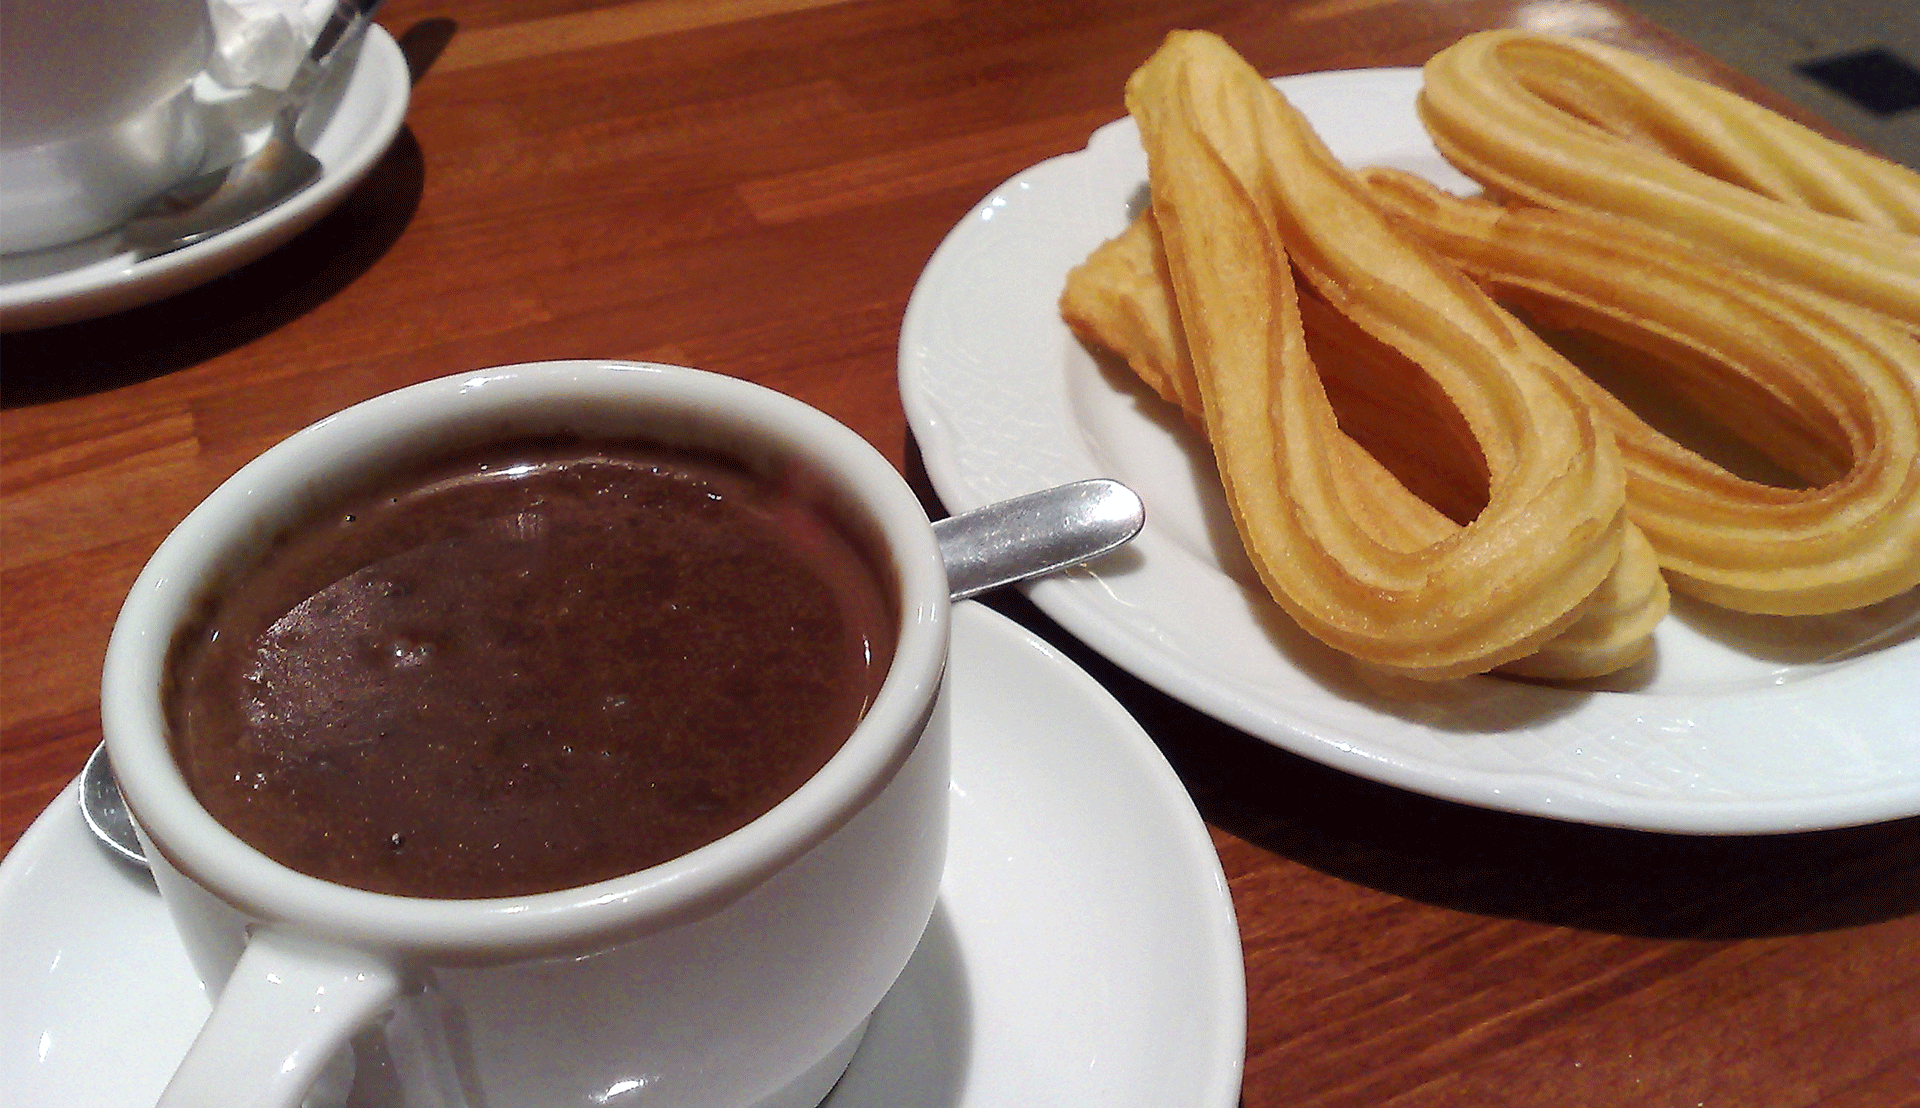 Rutgers Global - Hot chocolate and churros on a table